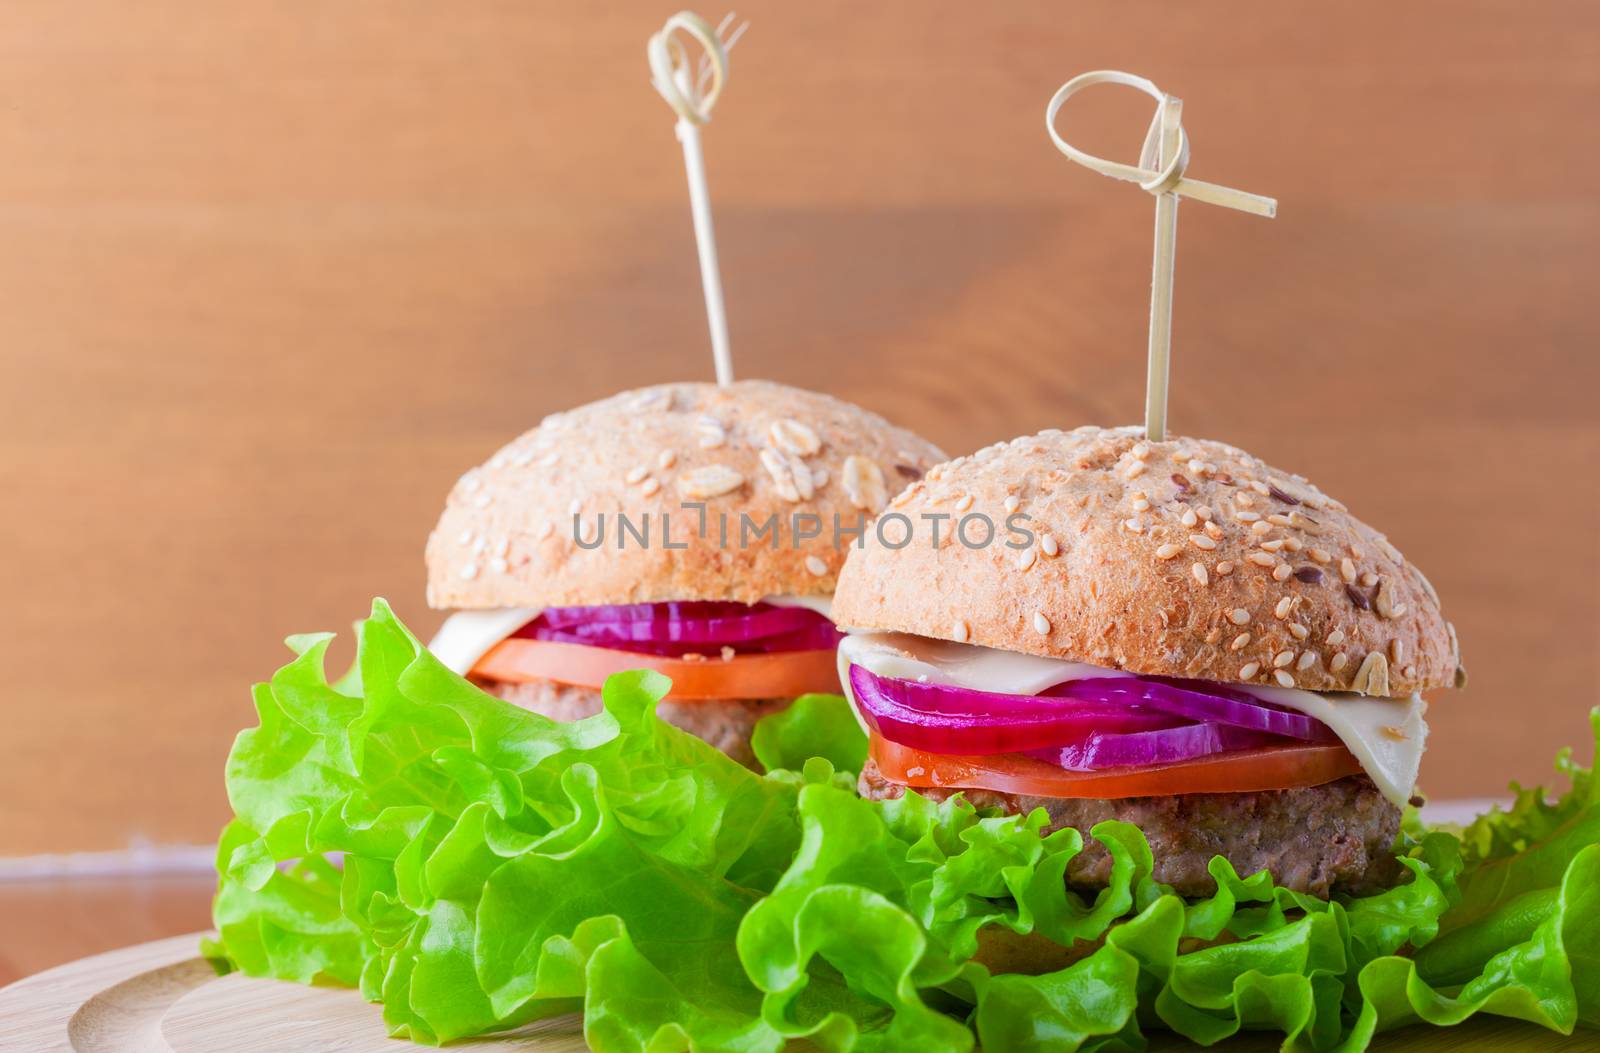 Cheeseburger with tomato, onion and green salad by supercat67